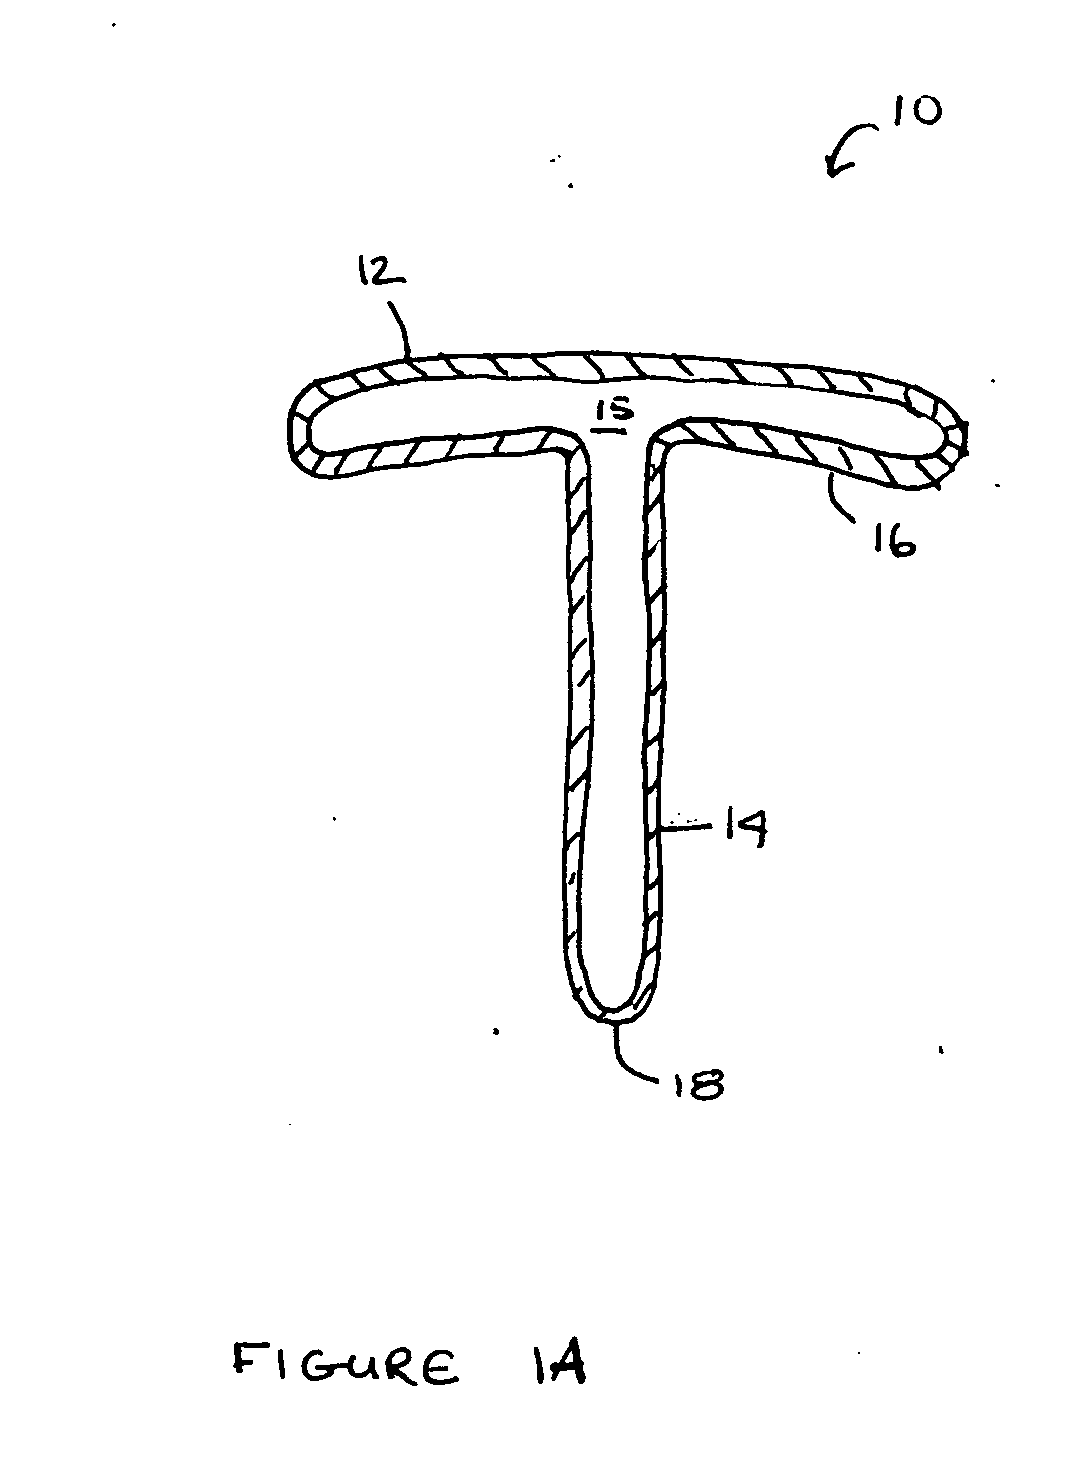 Pharmaceutical delivery device and method for providing ocular treatment